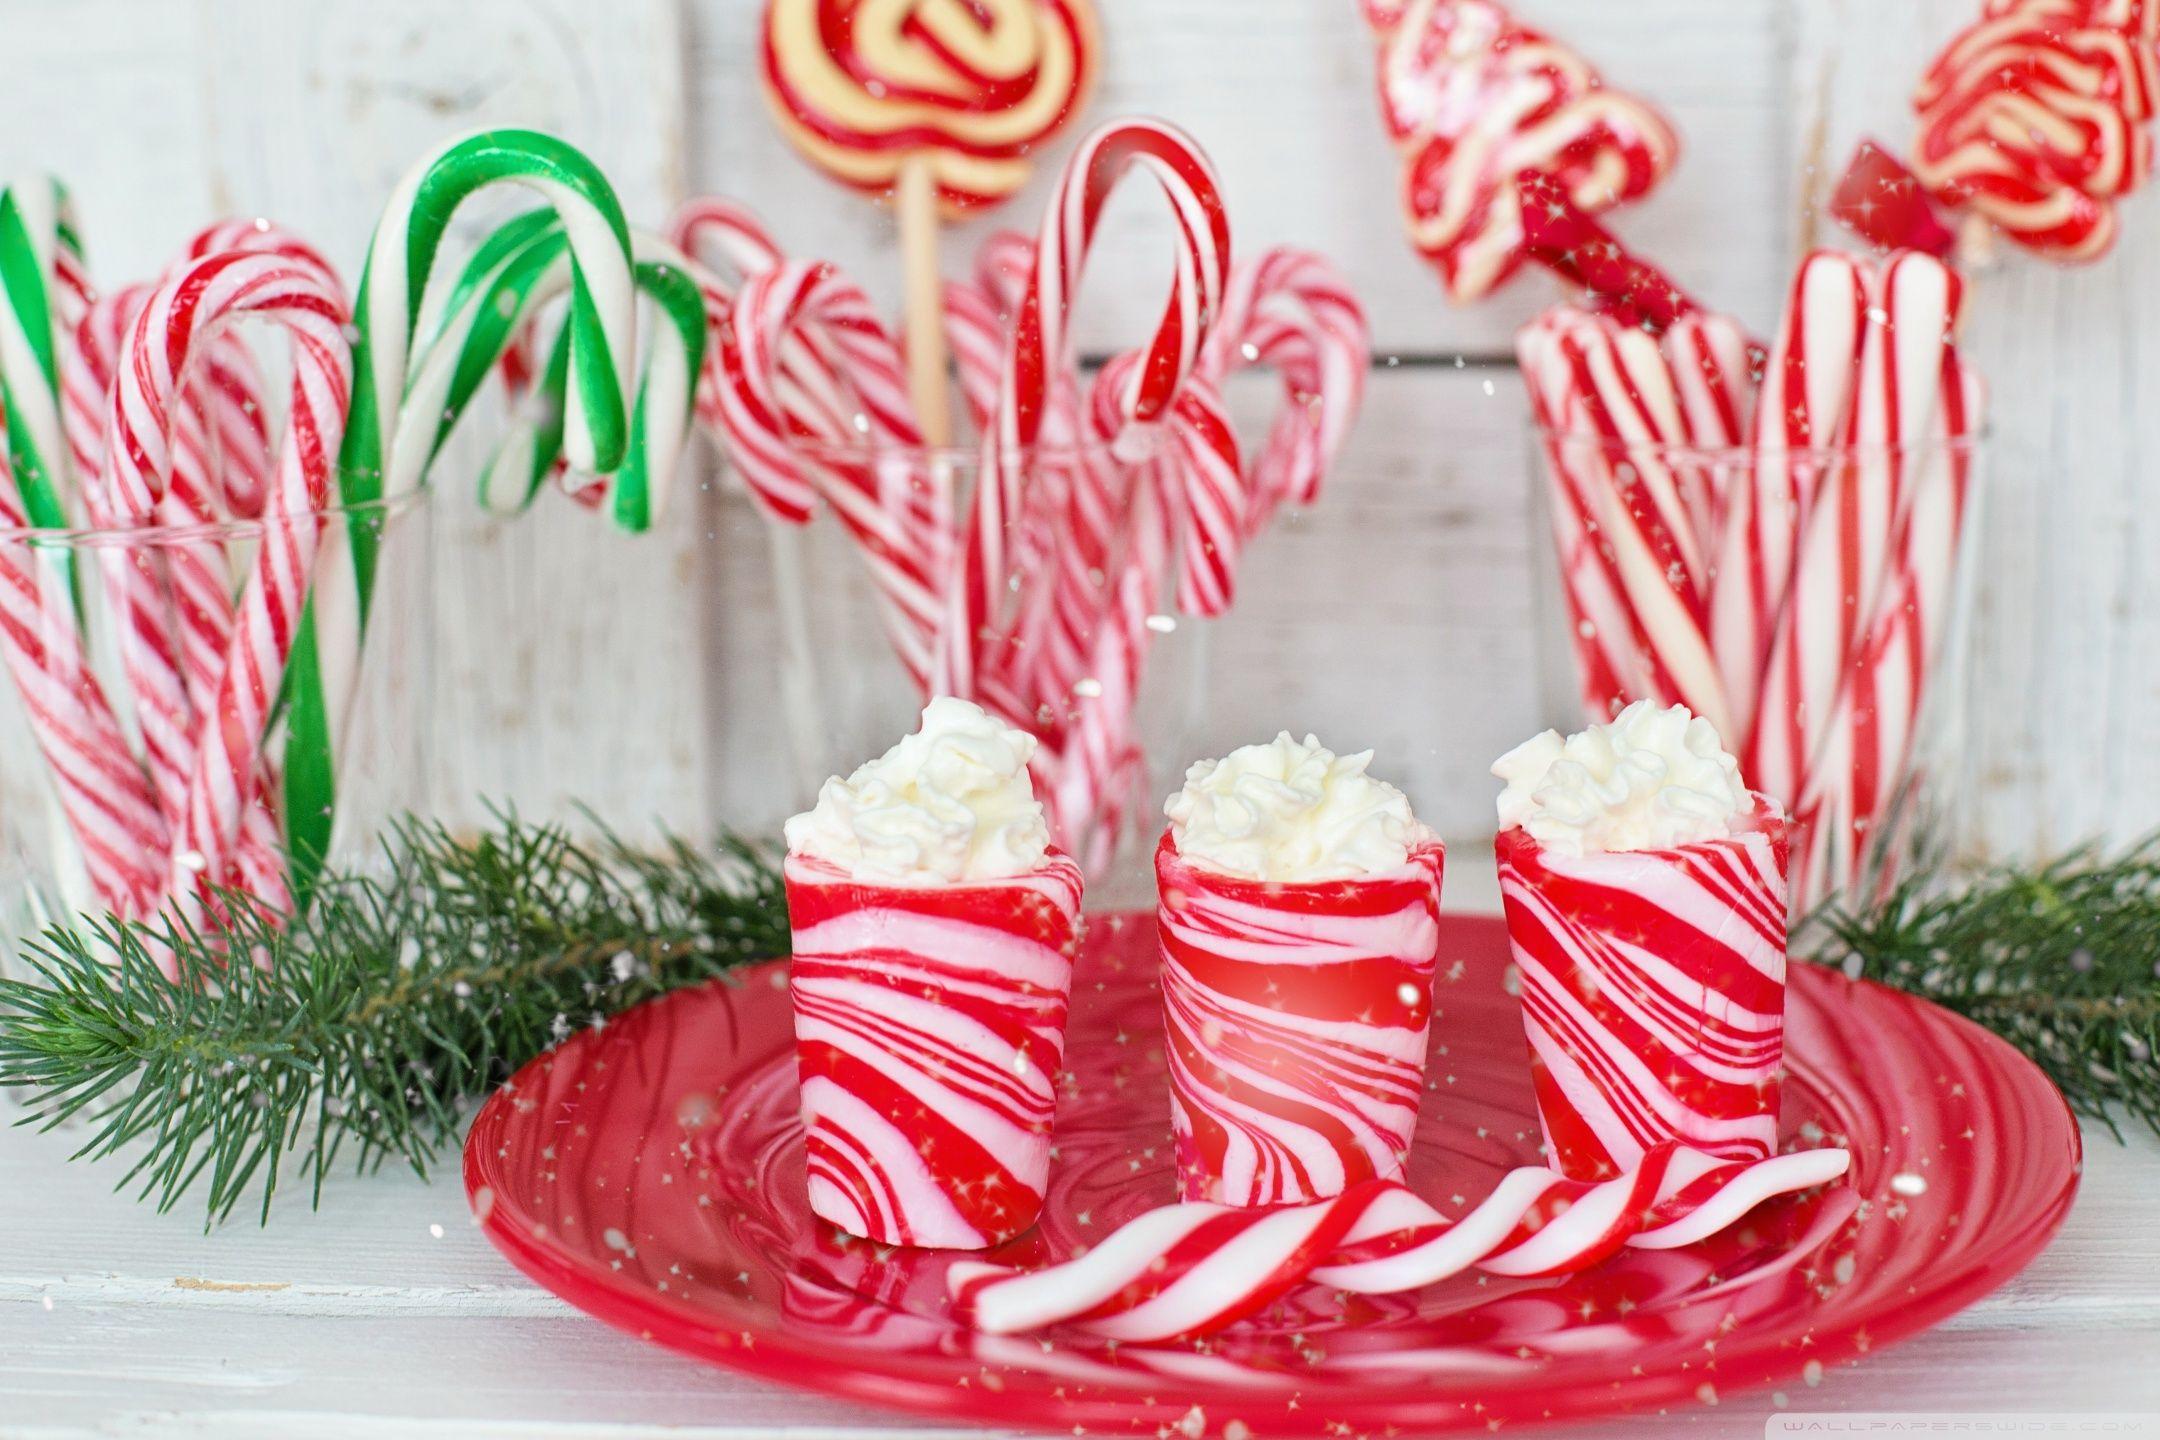 Candy Canes with Red Stripes, Peppermint ❤ 4K HD Desktop Wallpaper